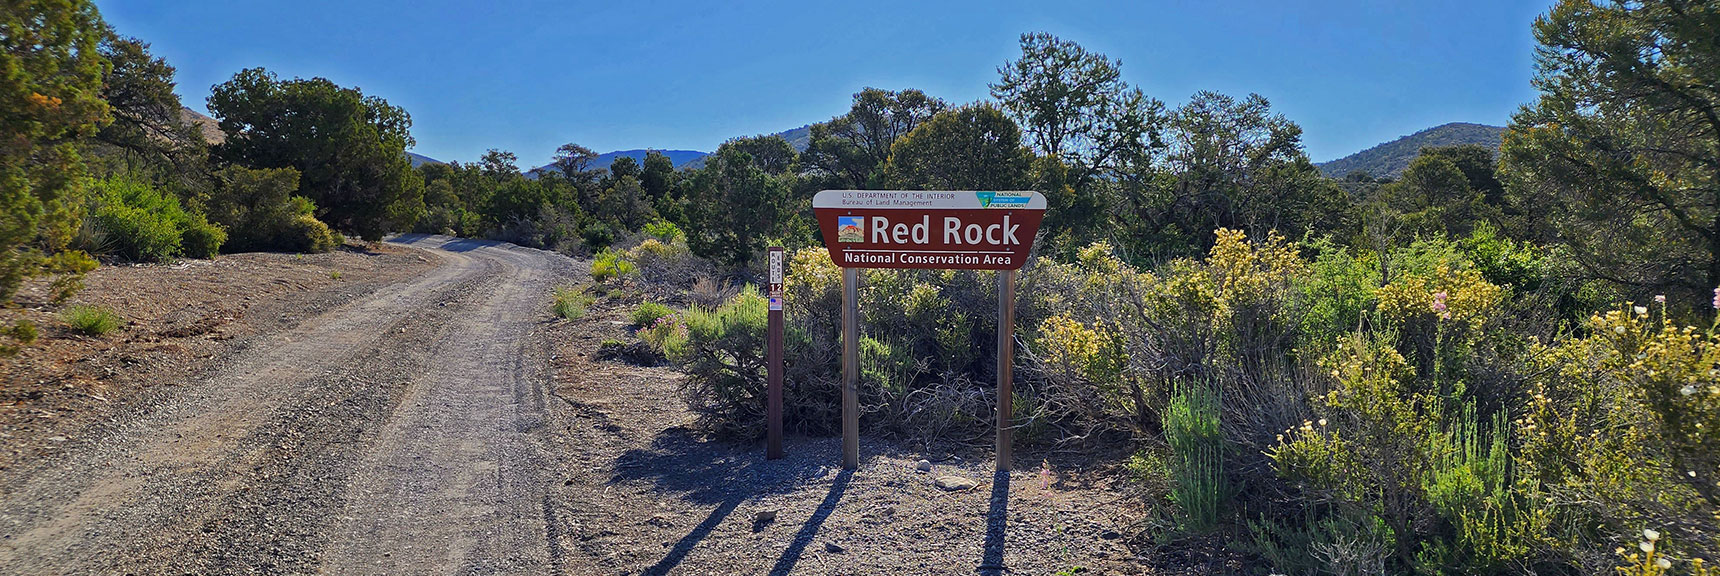 Rainbow Springs Road Provides Access to Little Zion | Lovell Canyon Roads, Nevada | David Smith | LasV3gasAreaTrails.com